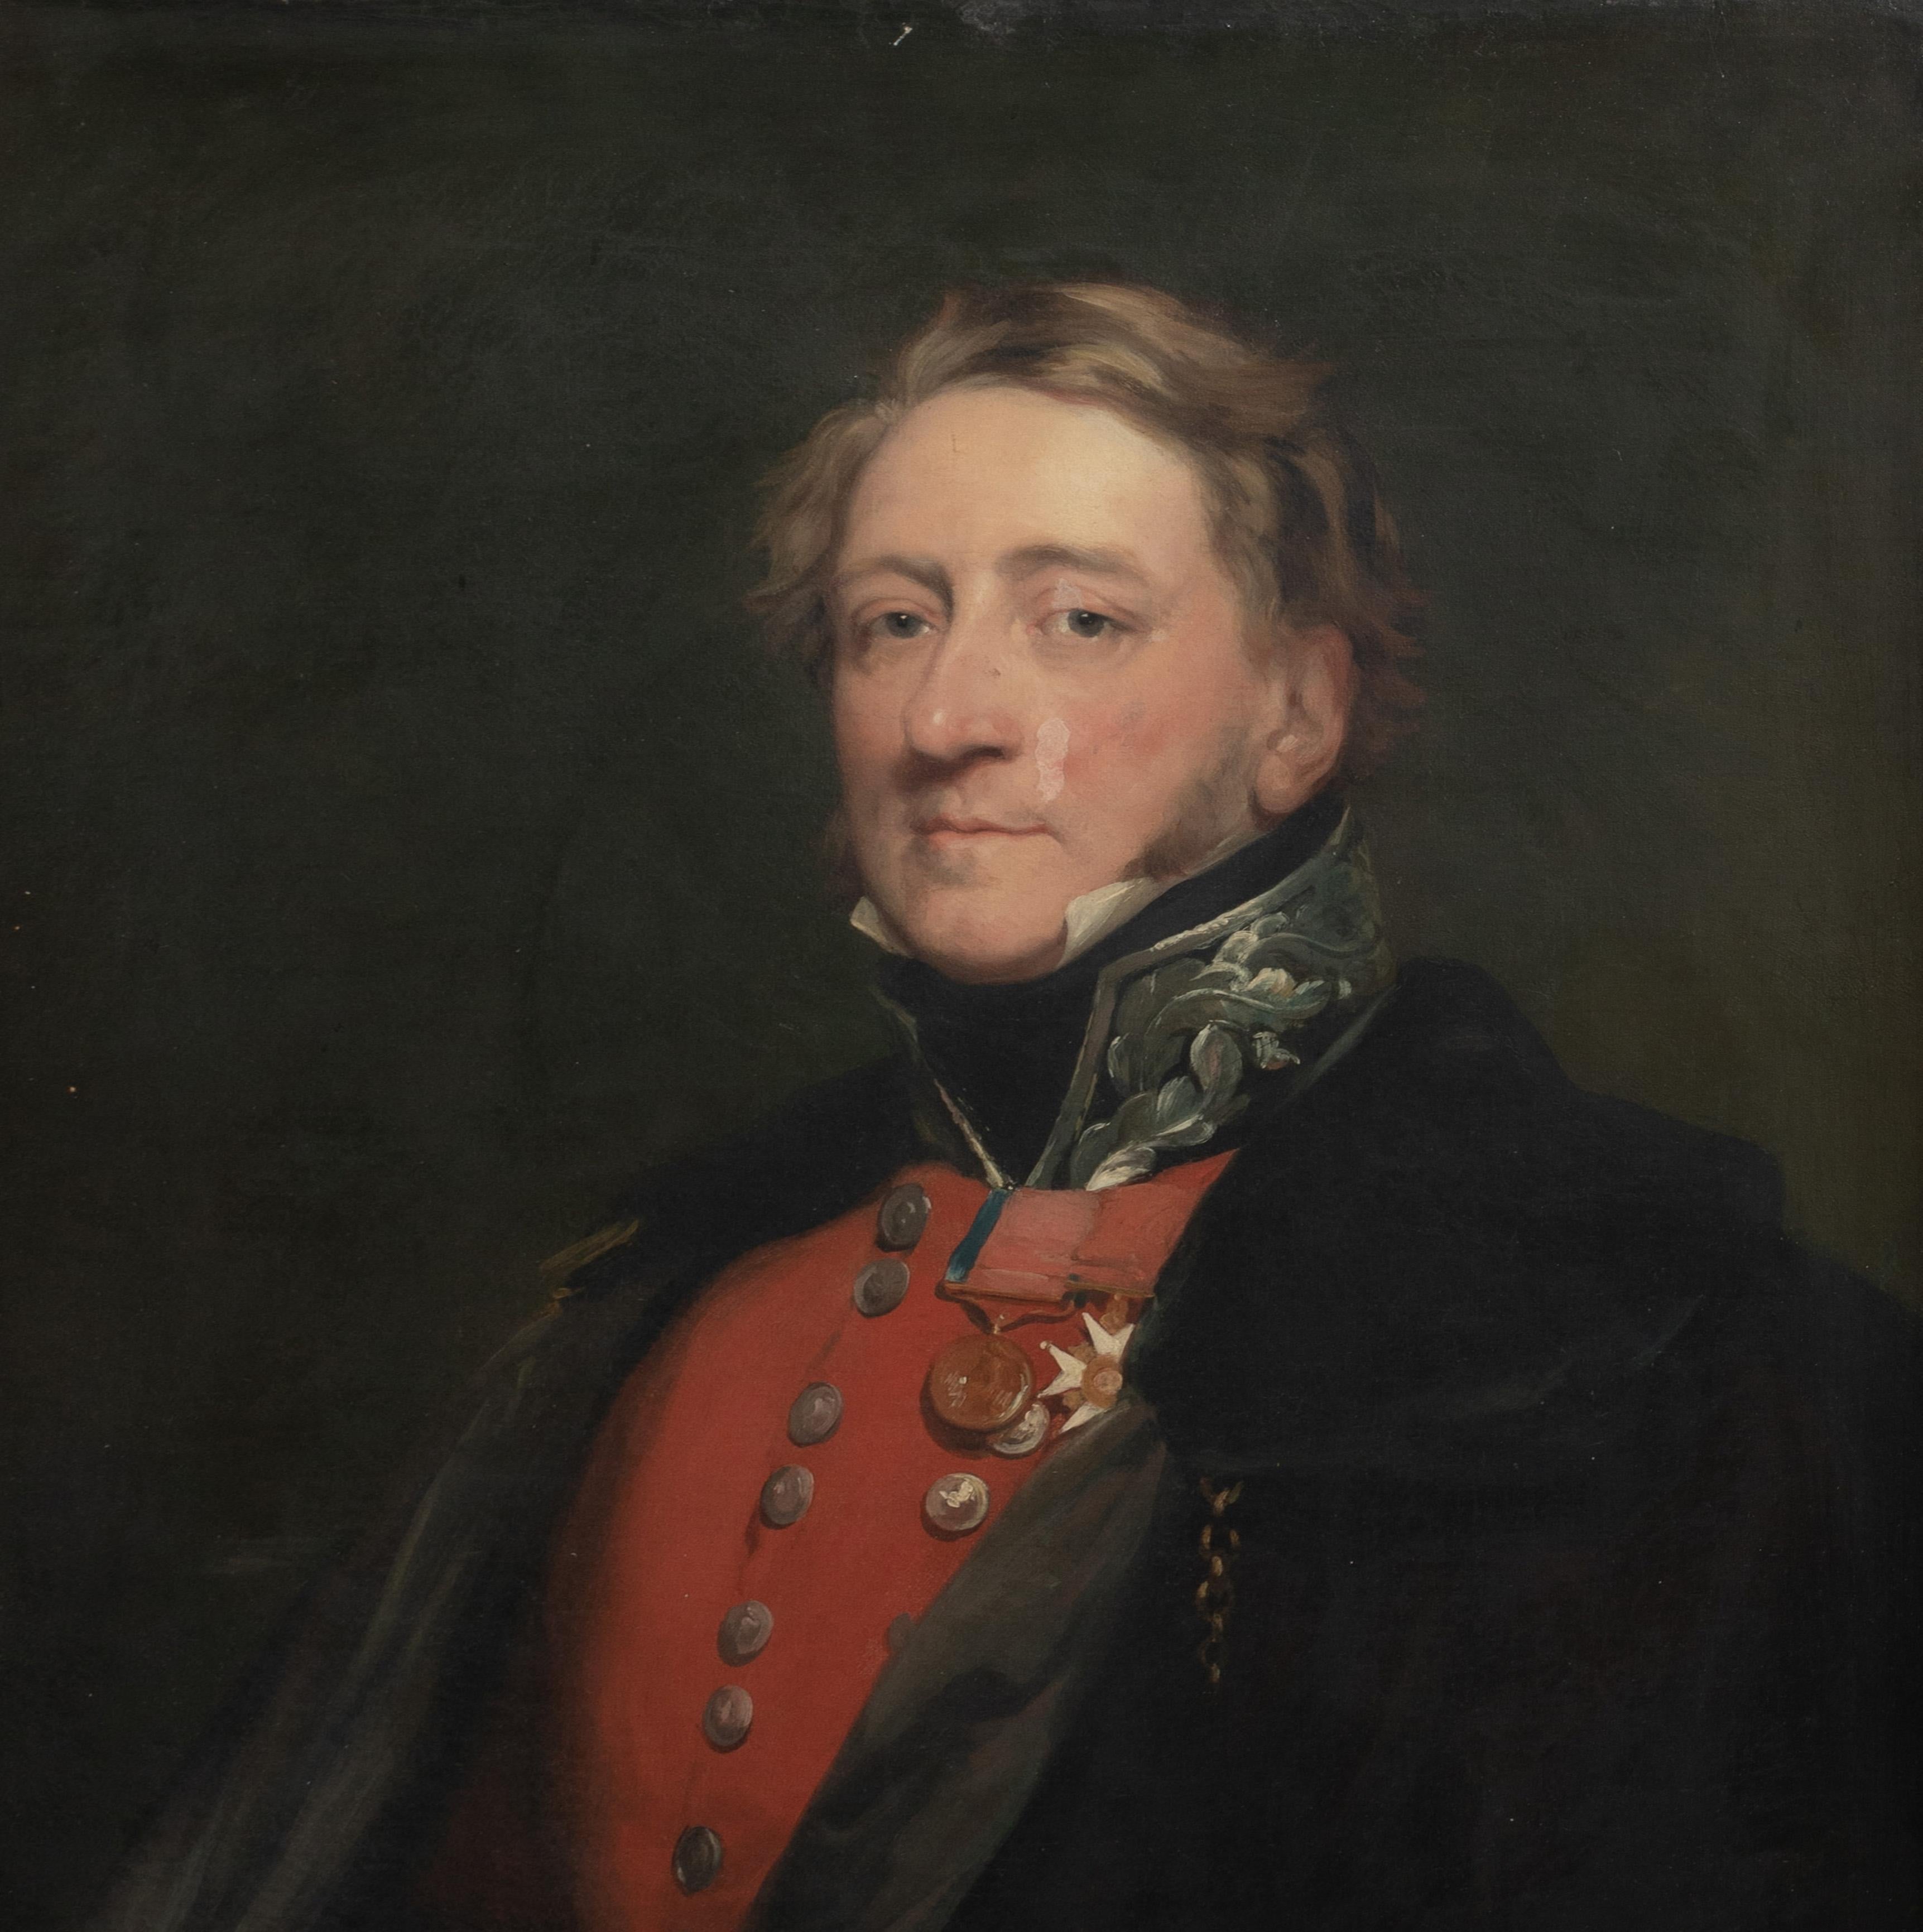 Portrait of A British Officer, traditionally identified as Leiutentant-General S - Black Portrait Painting by Sir Thomas Lawrence